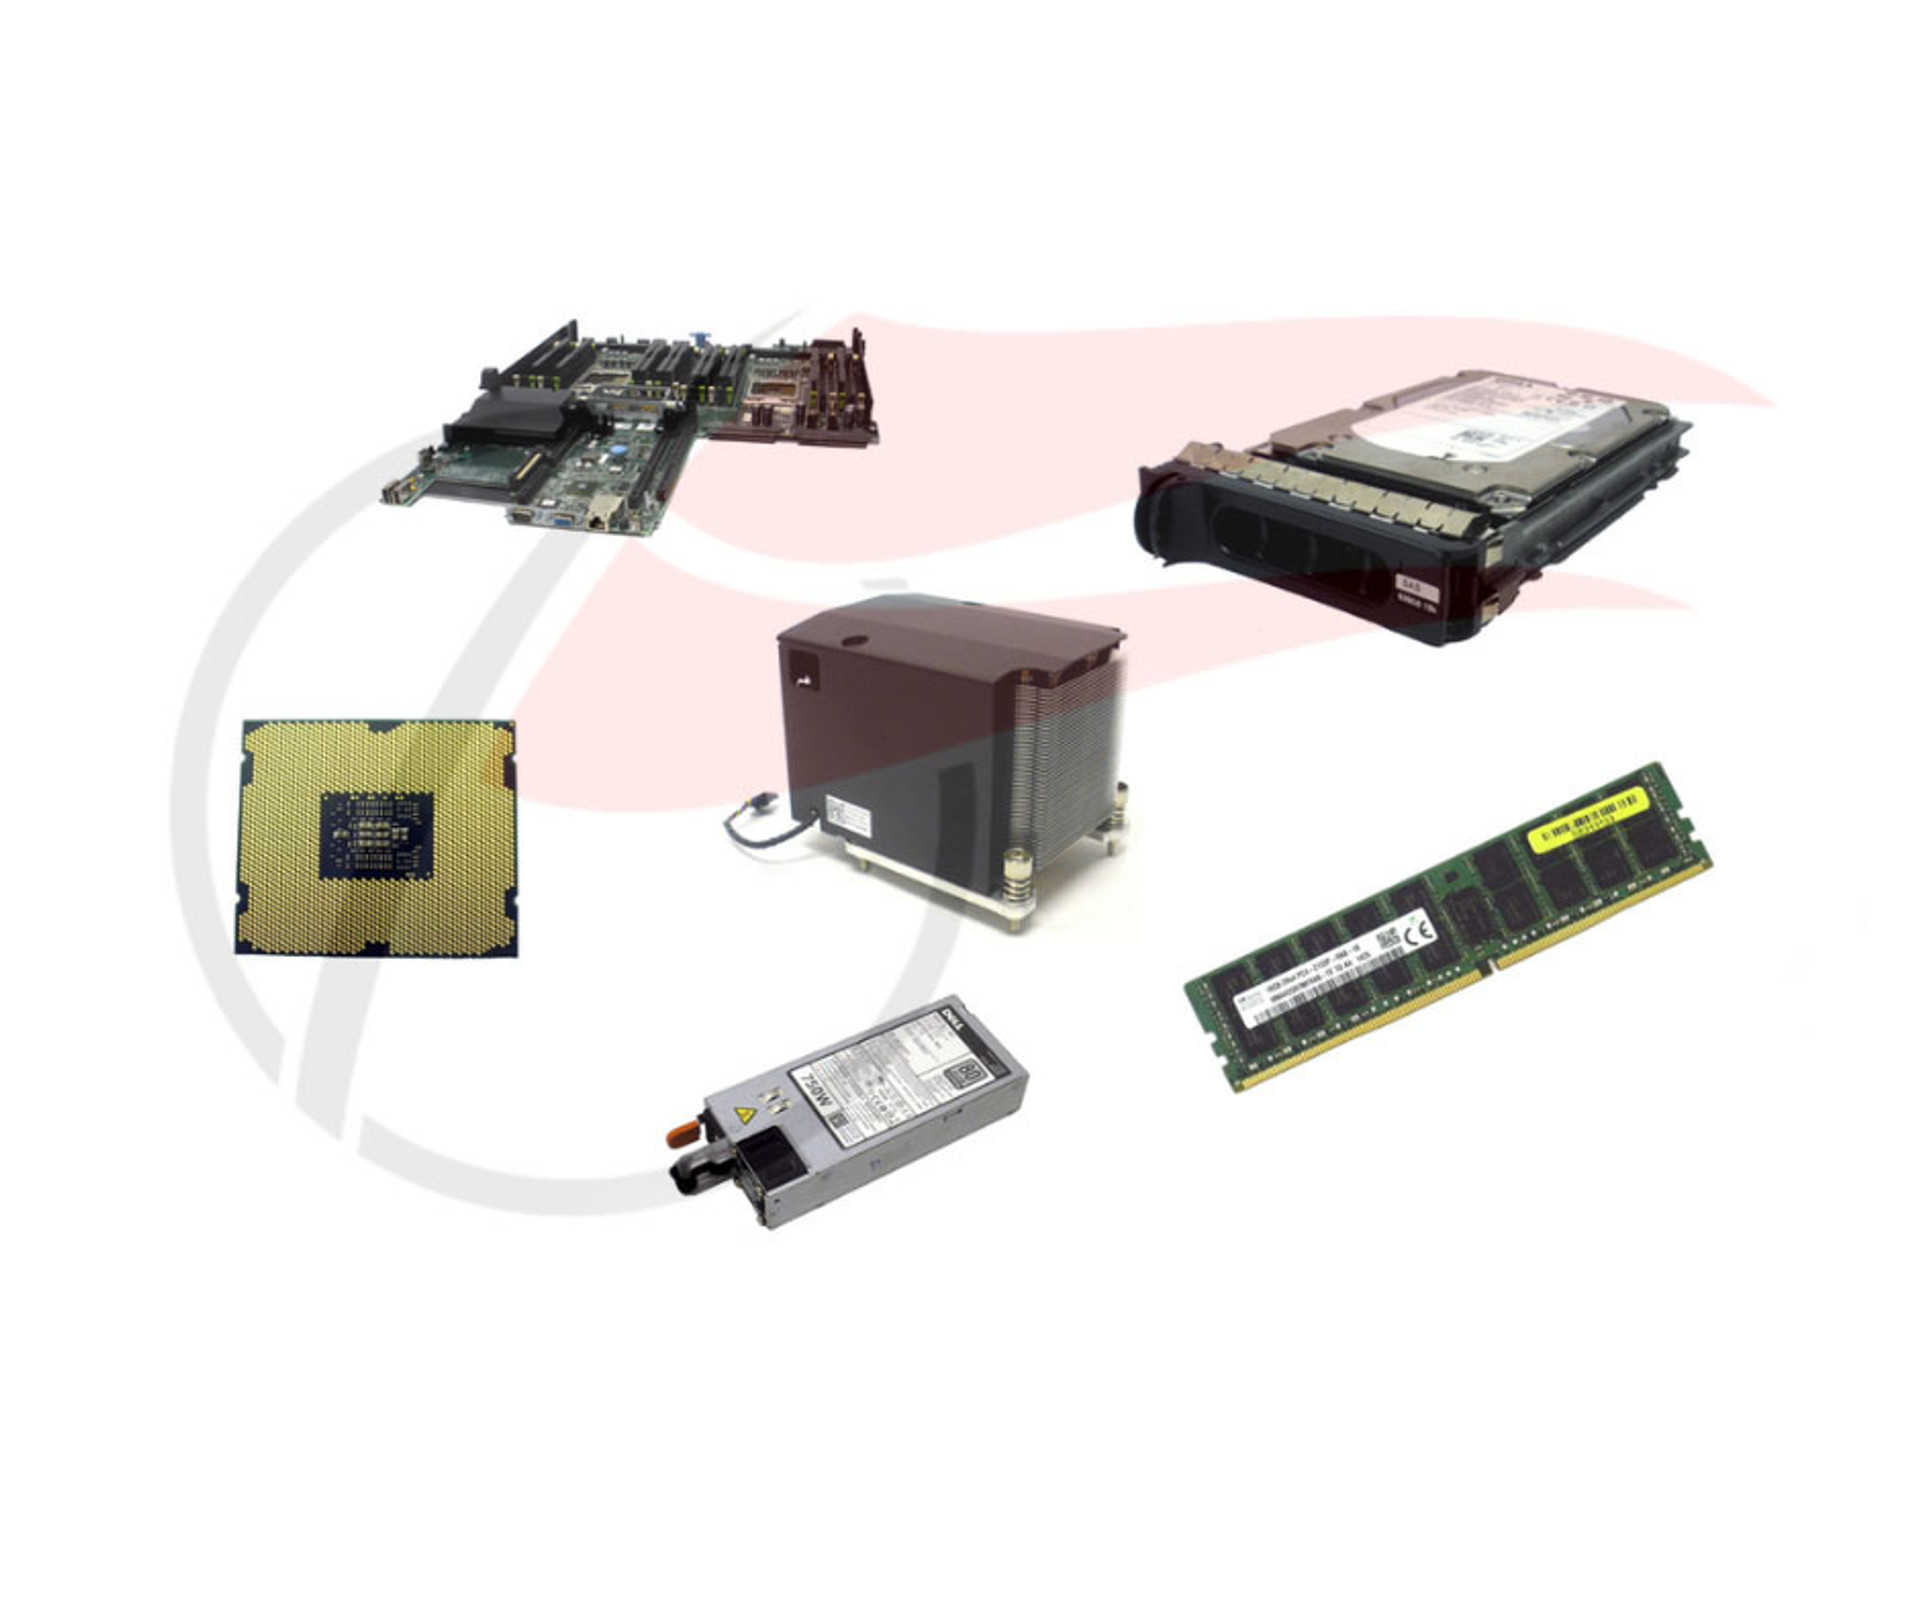 Dell PowerEdge R730 Network Adapters